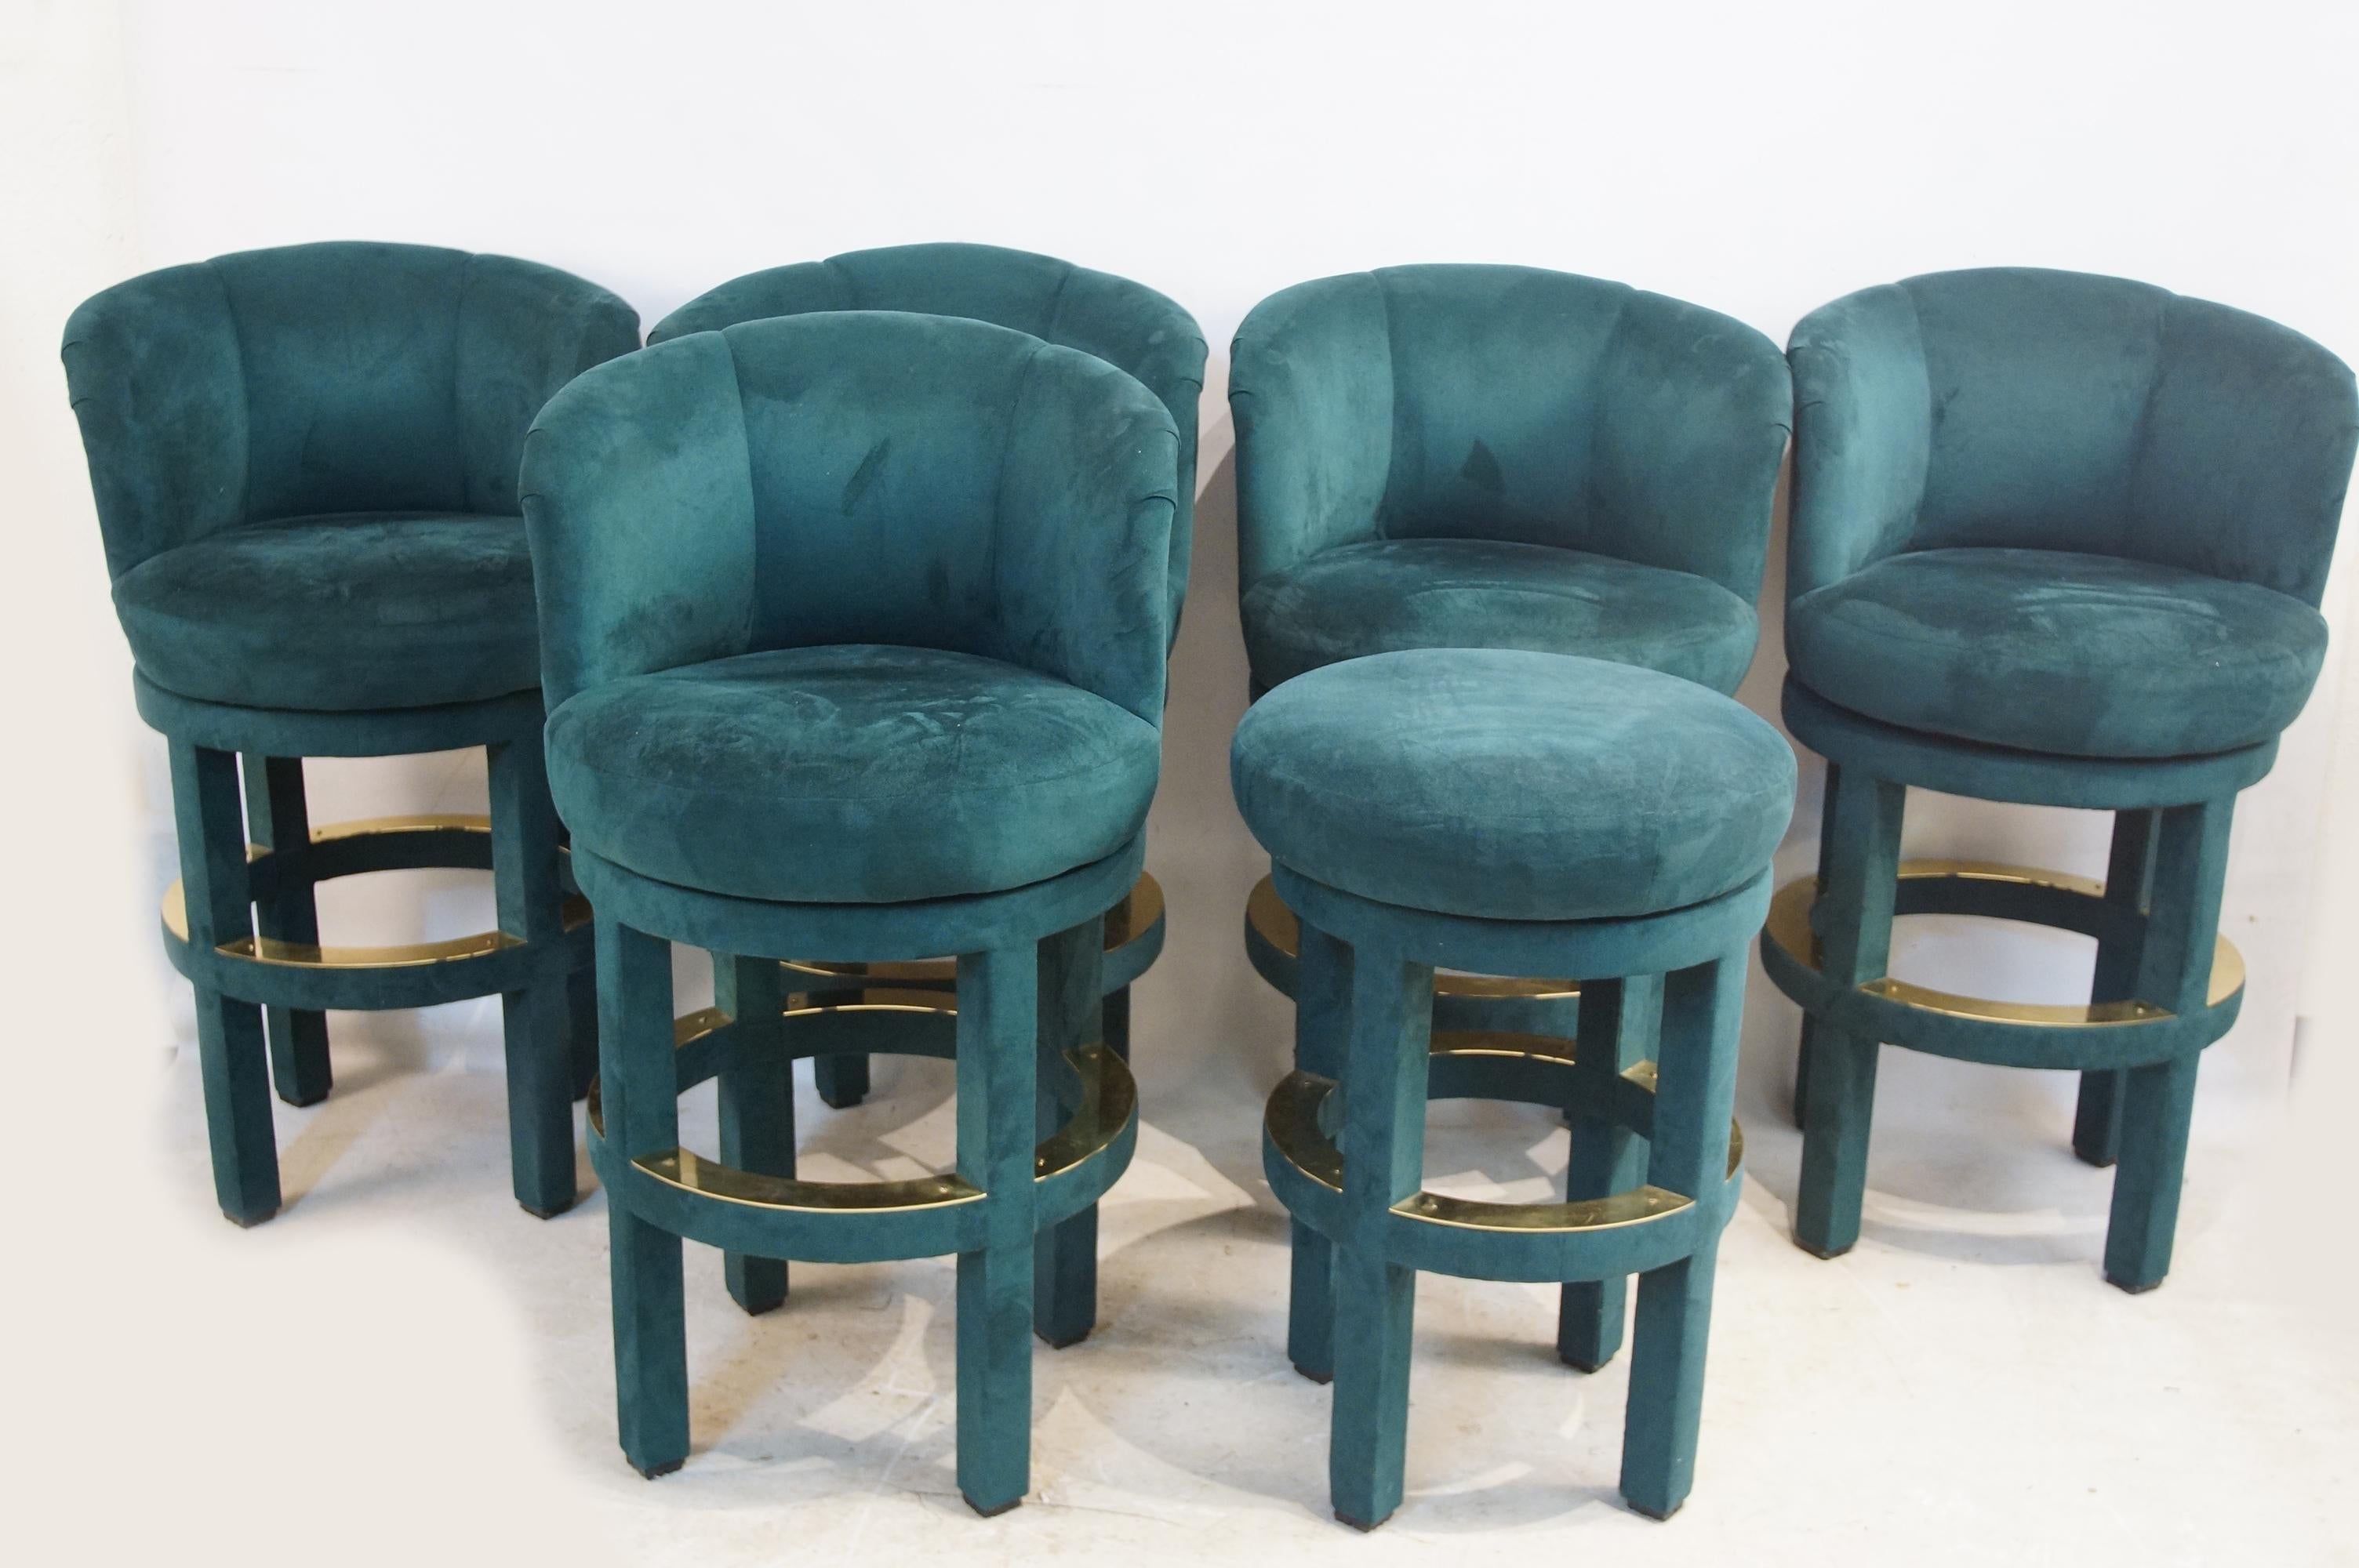 Custom made bar stools in a dark green velour, with brass trim, five with backs, one without. Measurements are estimated.